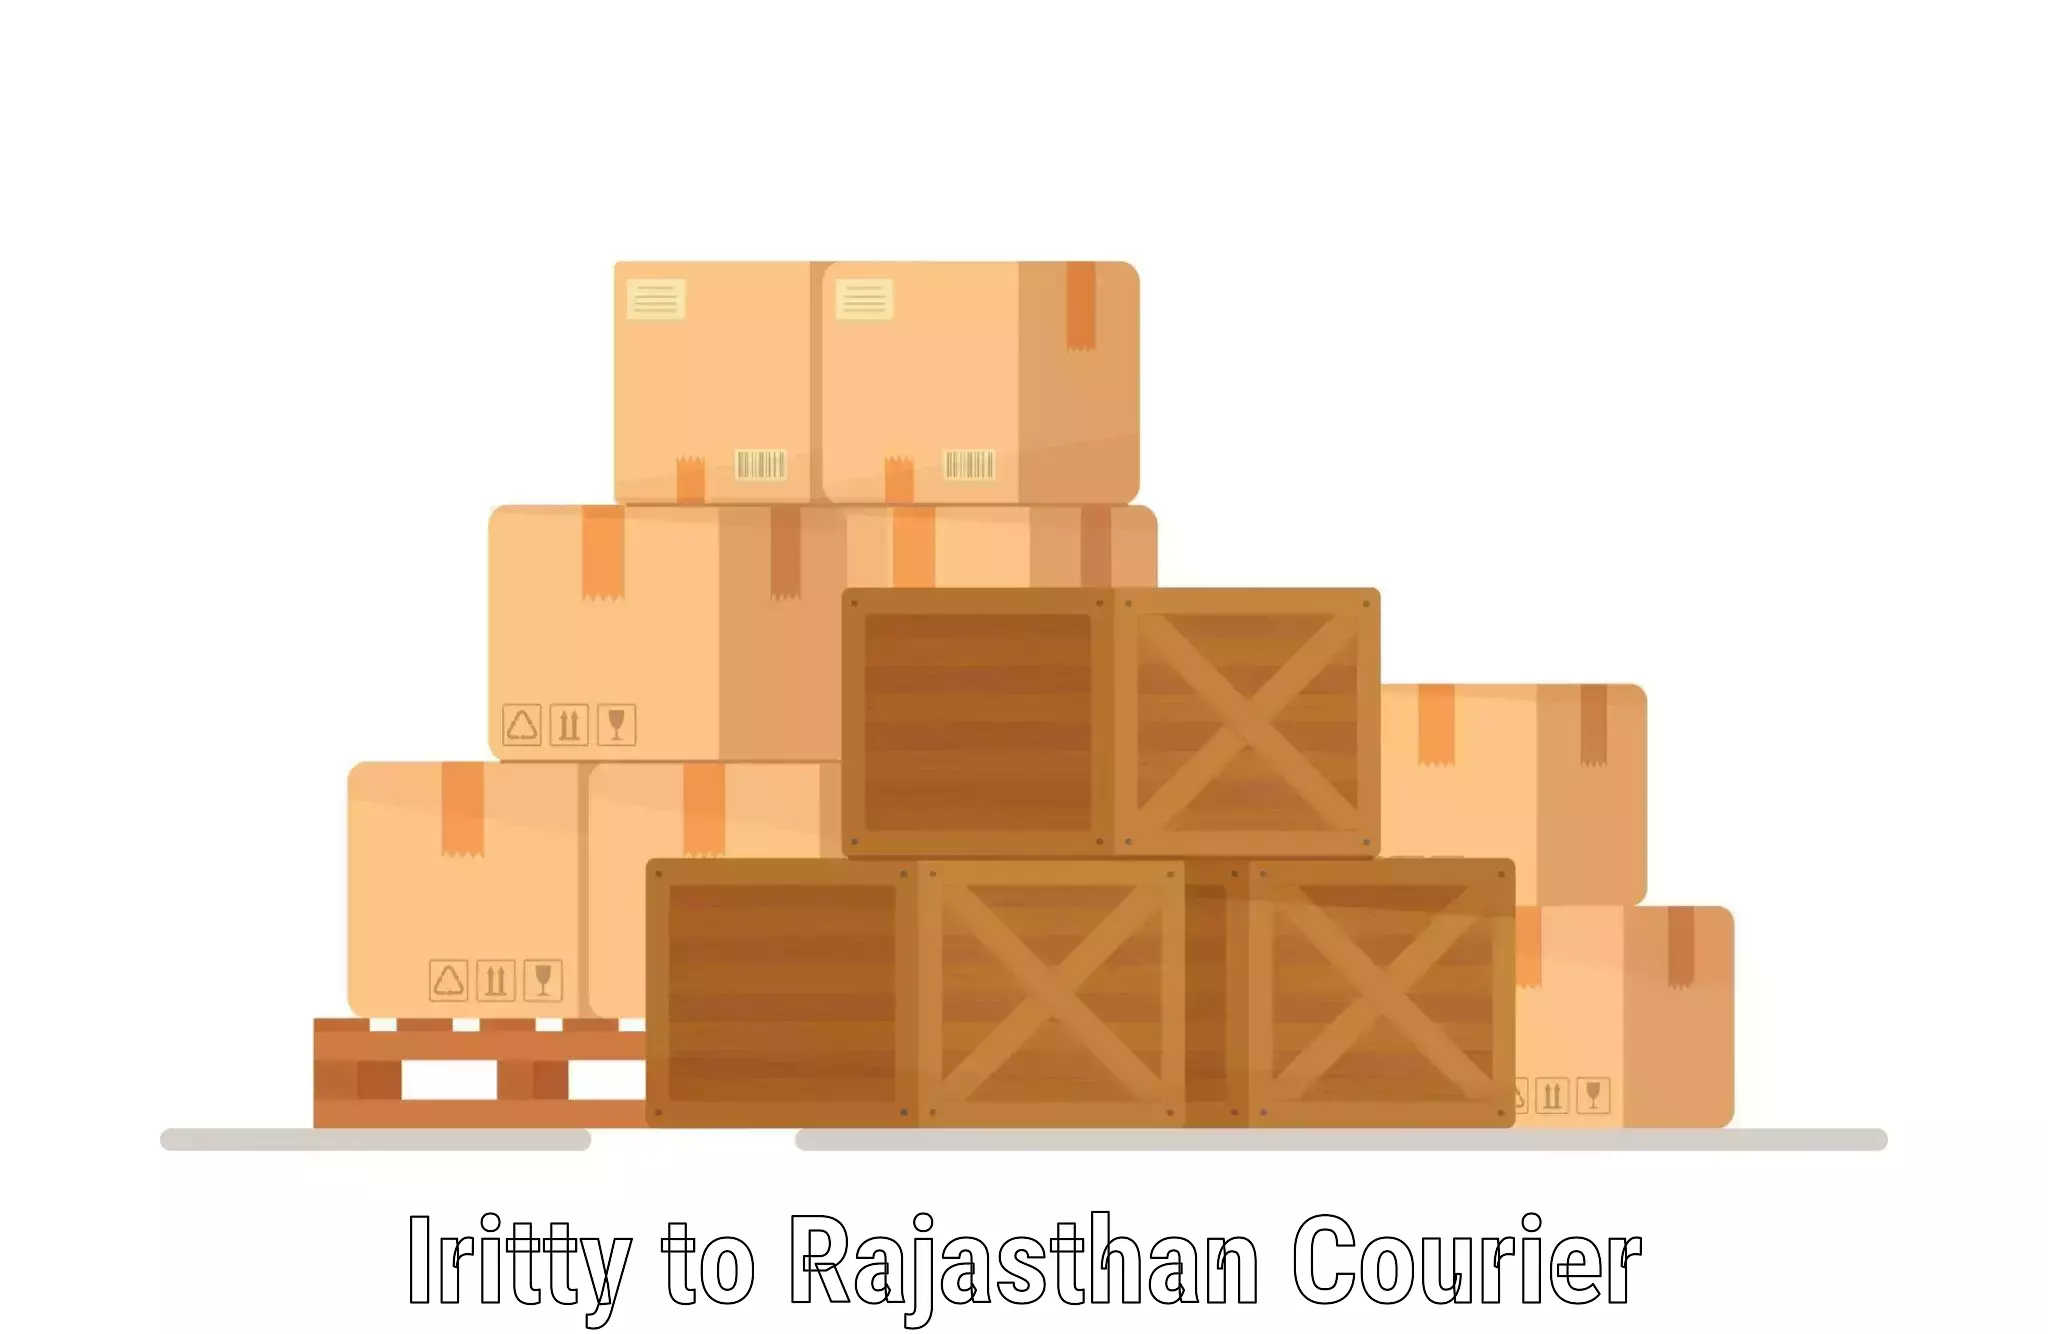 Nationwide shipping coverage in Iritty to Khandela Sikar